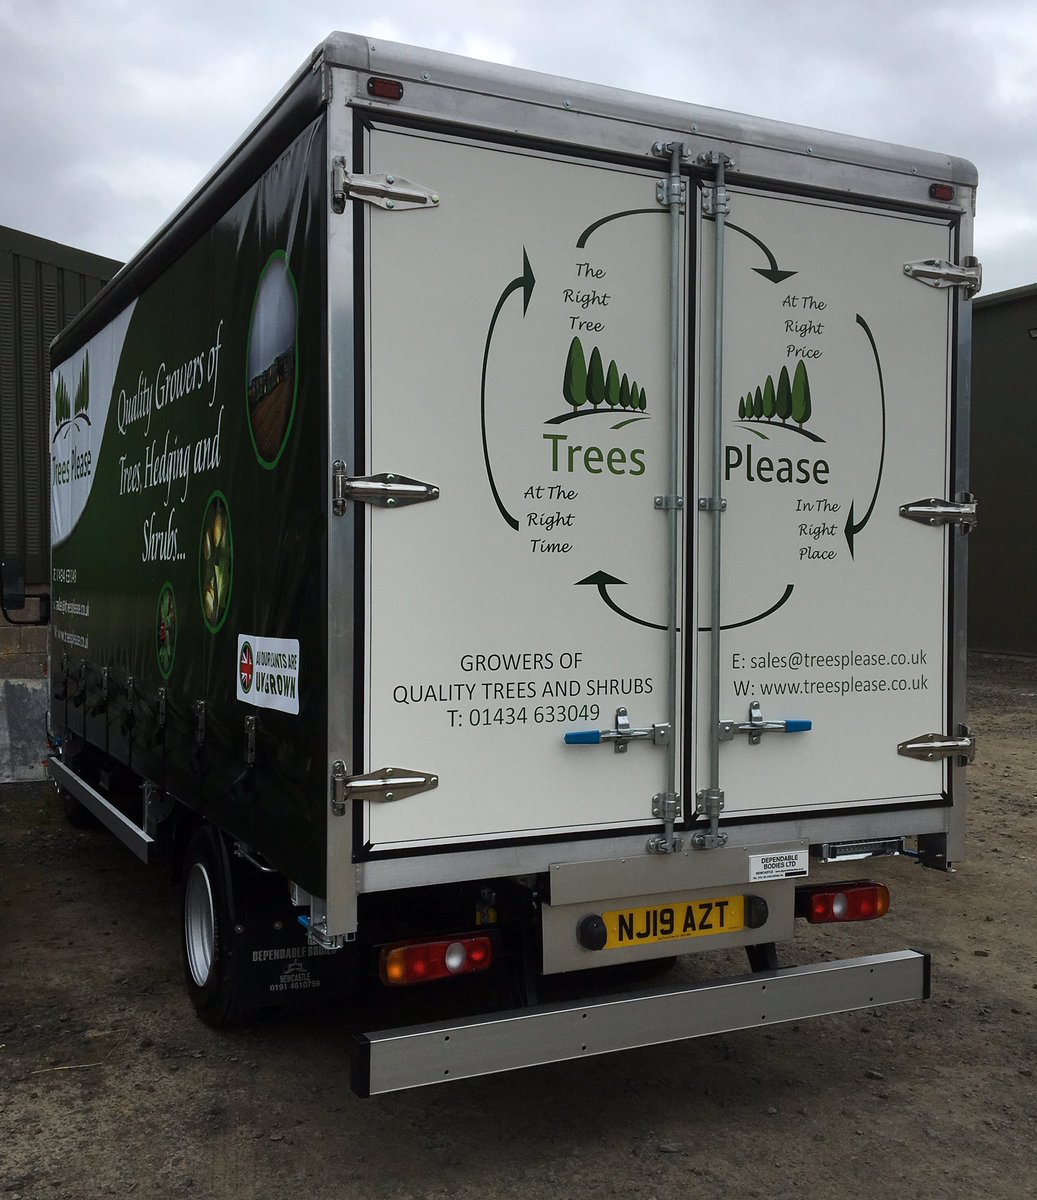 New @treesplease1 truck ready for the upcoming season. Looking good for a very busy planting season ahead.